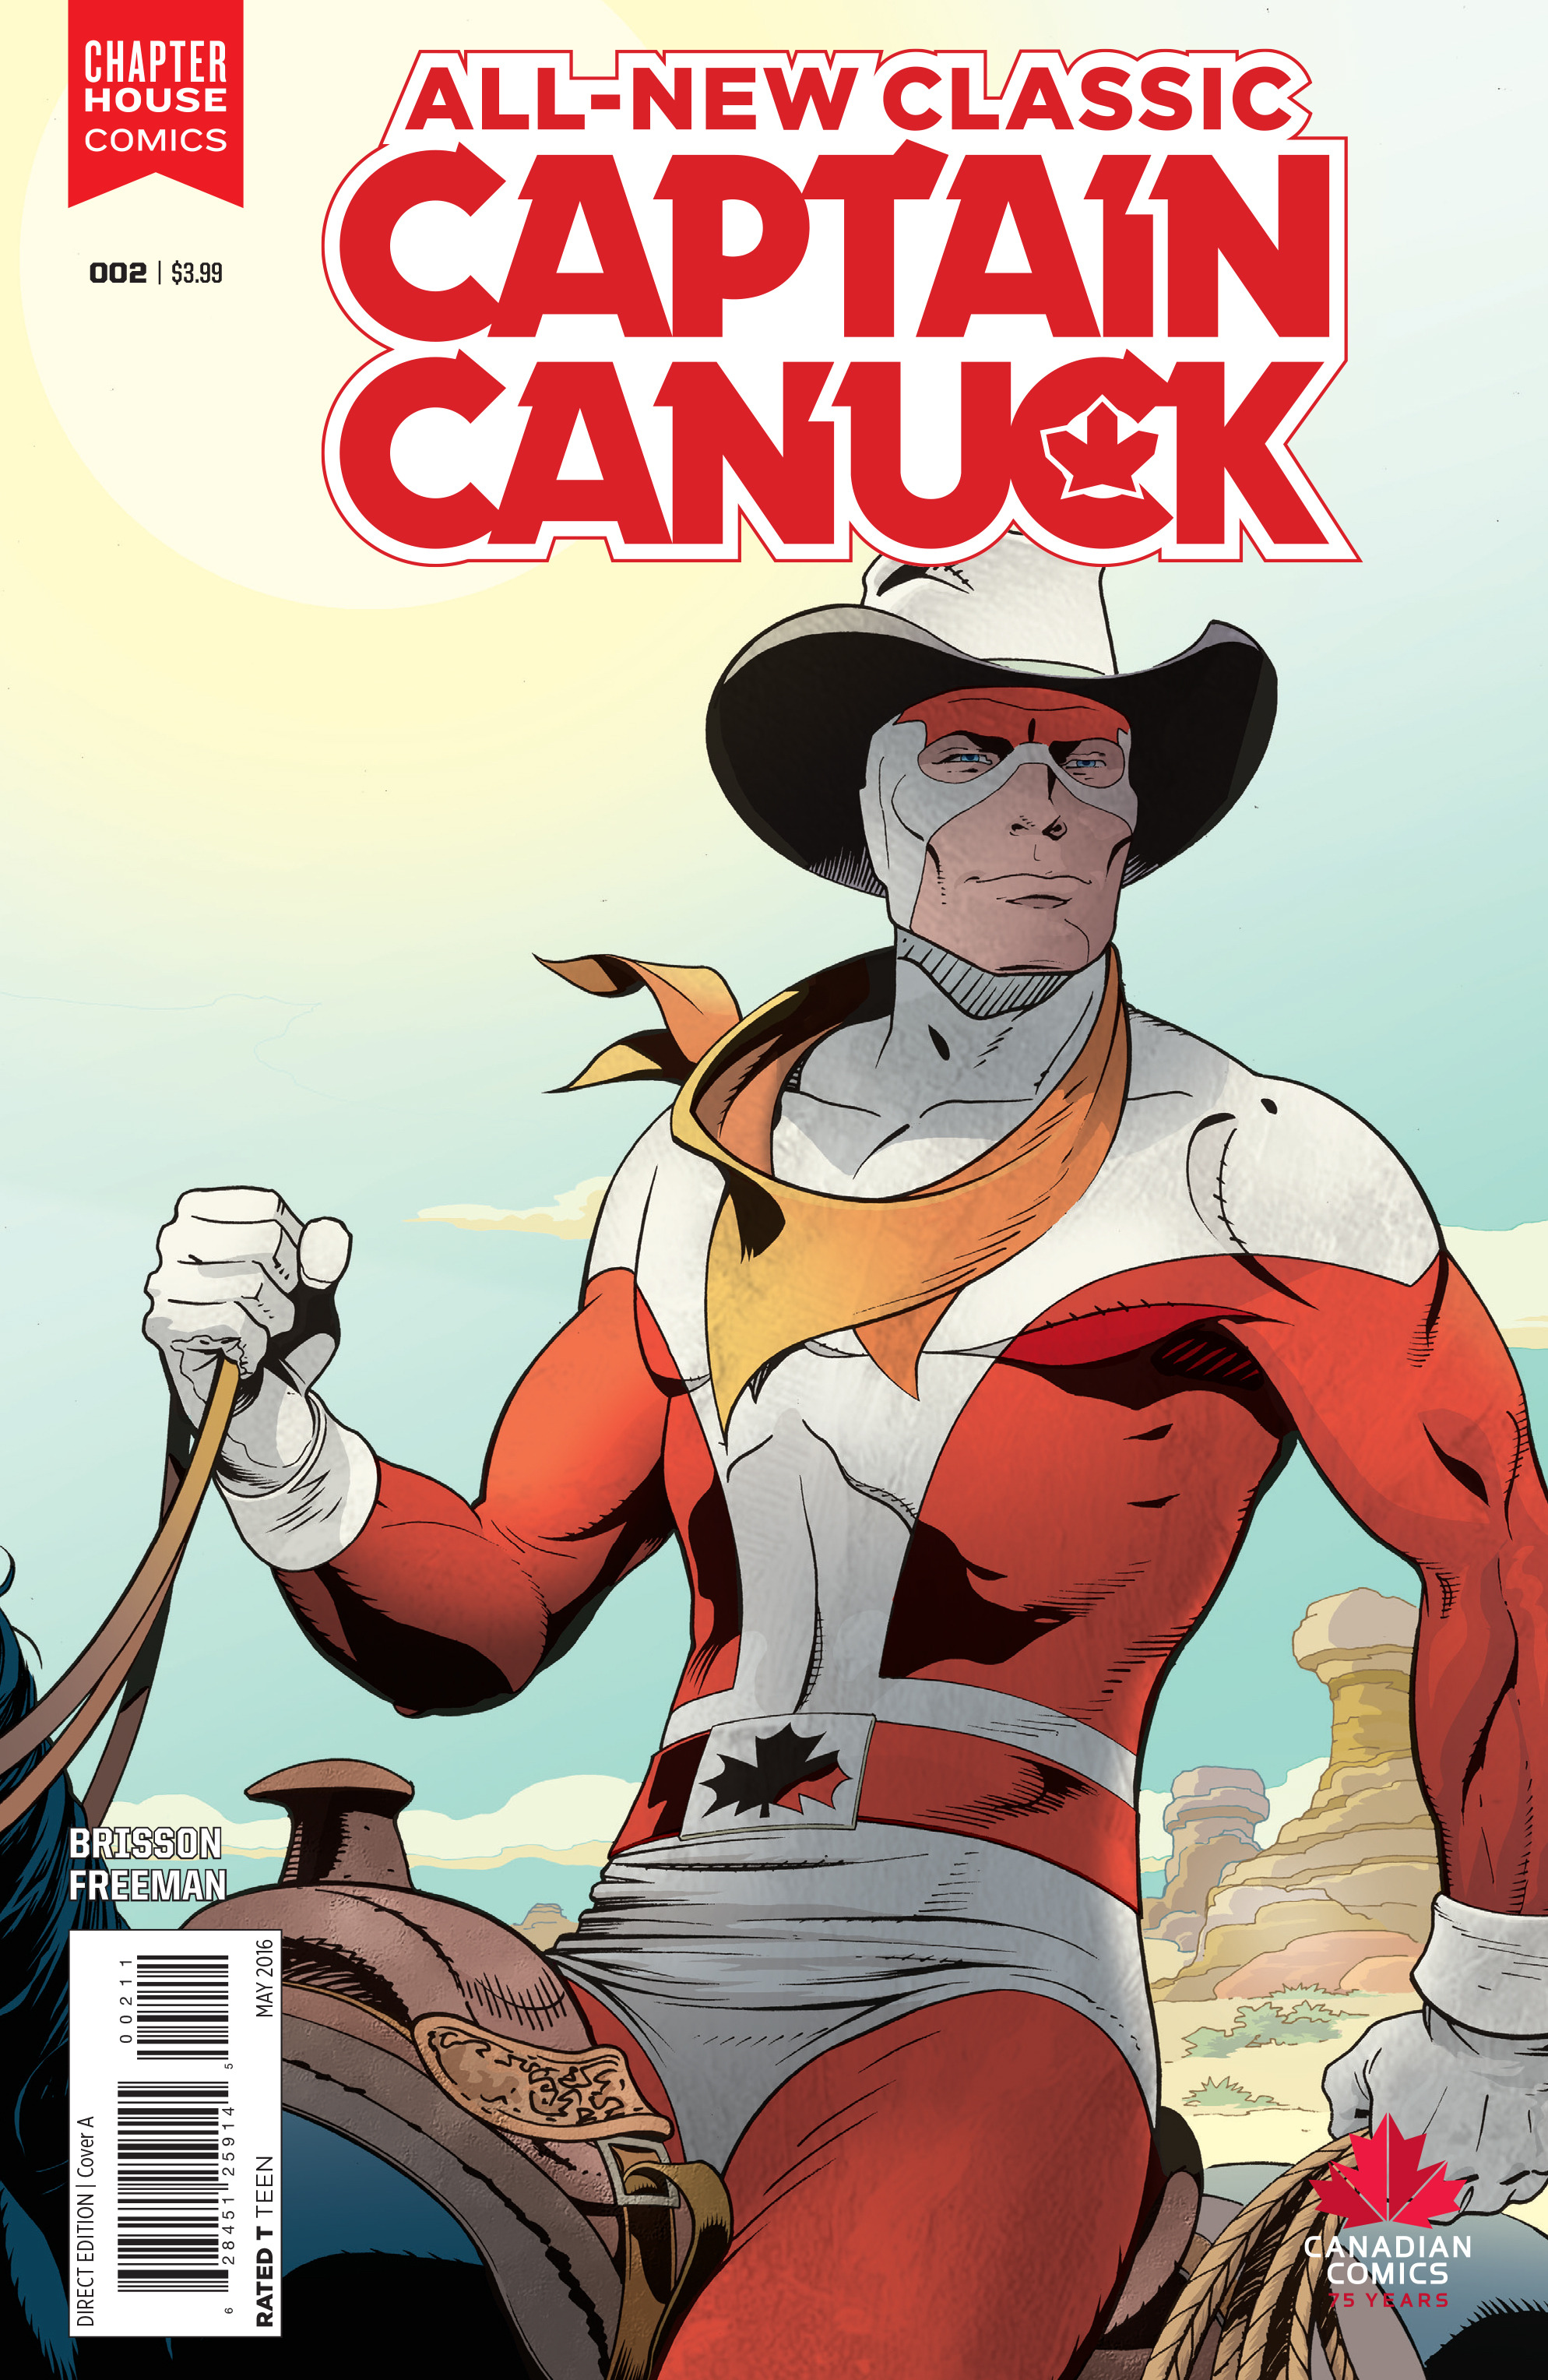 Read online All-New Classic Captain Canuck comic -  Issue #2 - 1